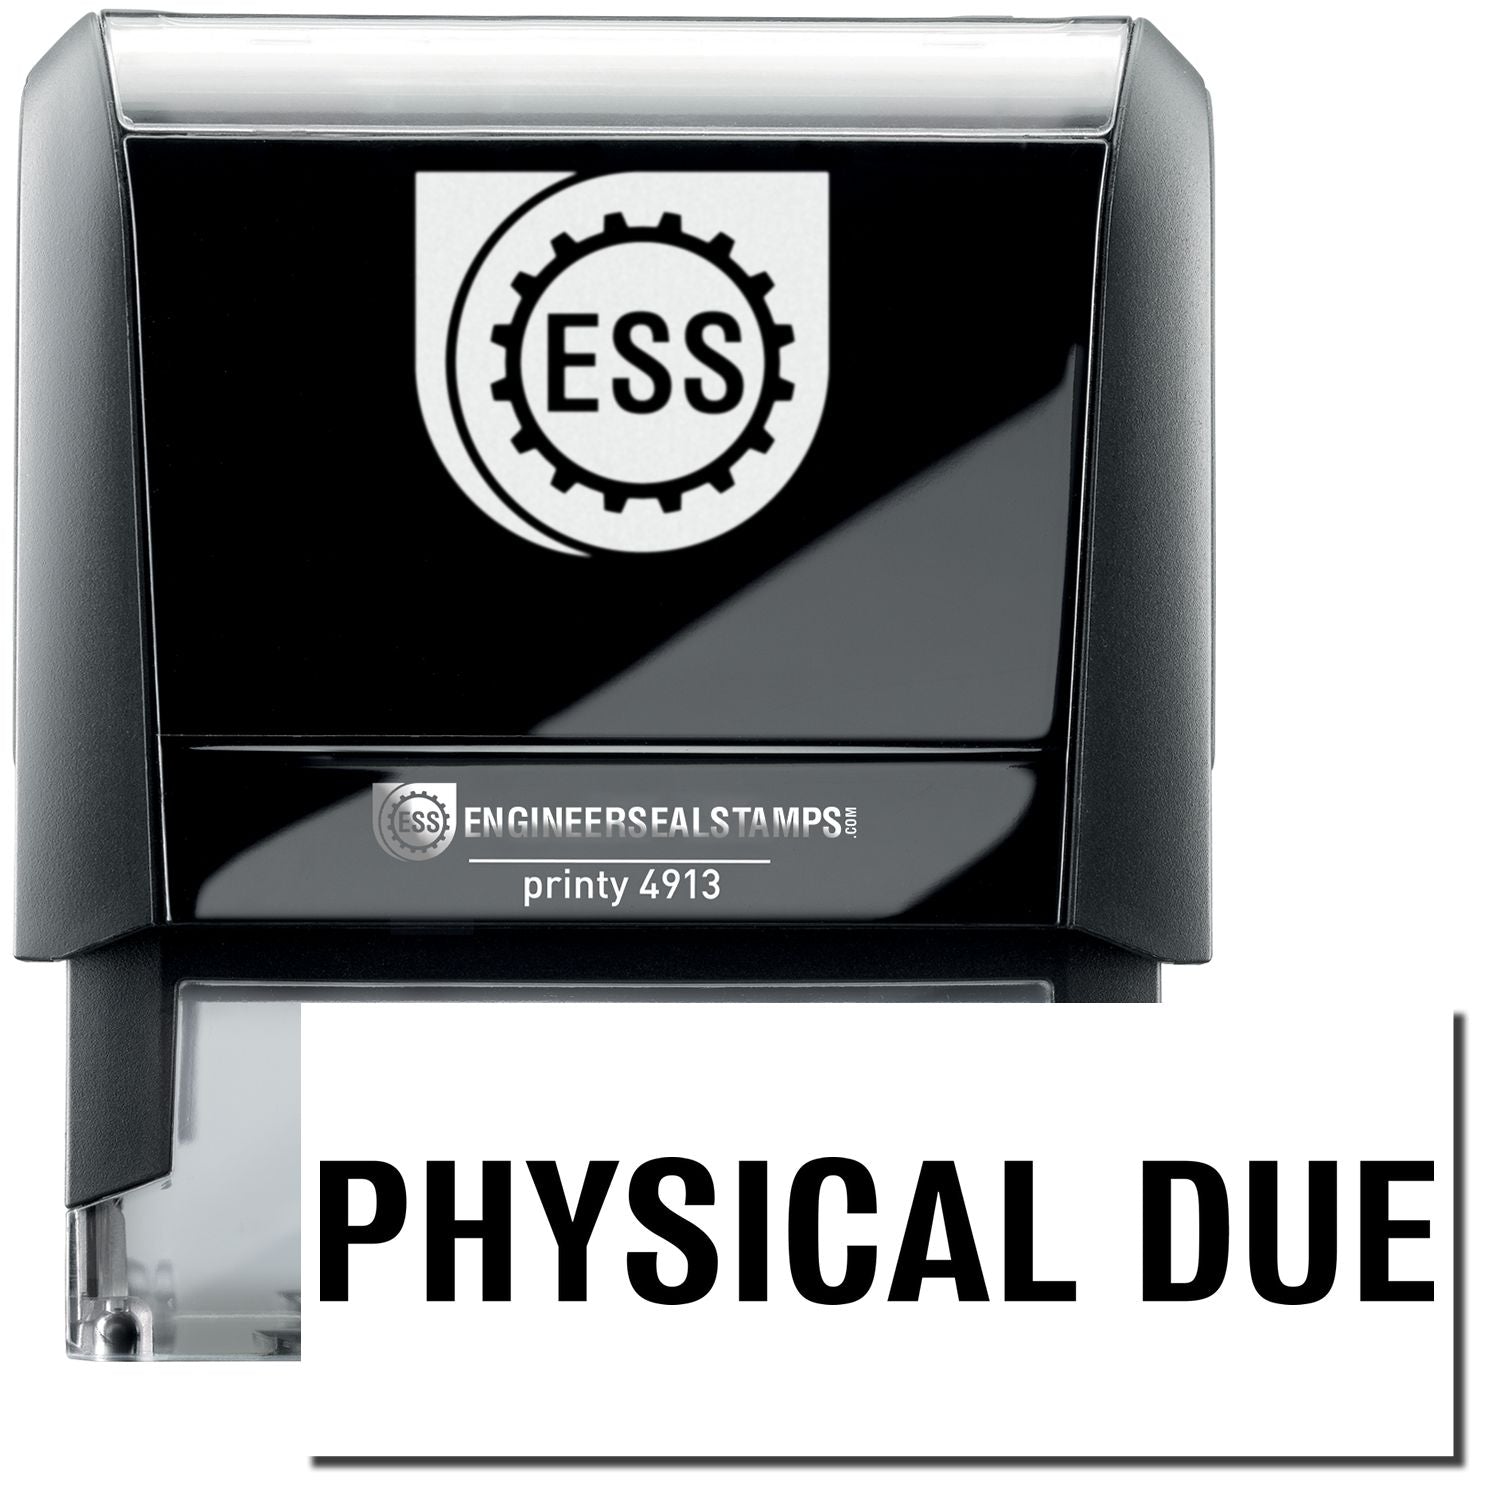 A self-inking stamp with a stamped image showing how the text "PHYSICAL DUE" in a large bold font is displayed by it after stamping.